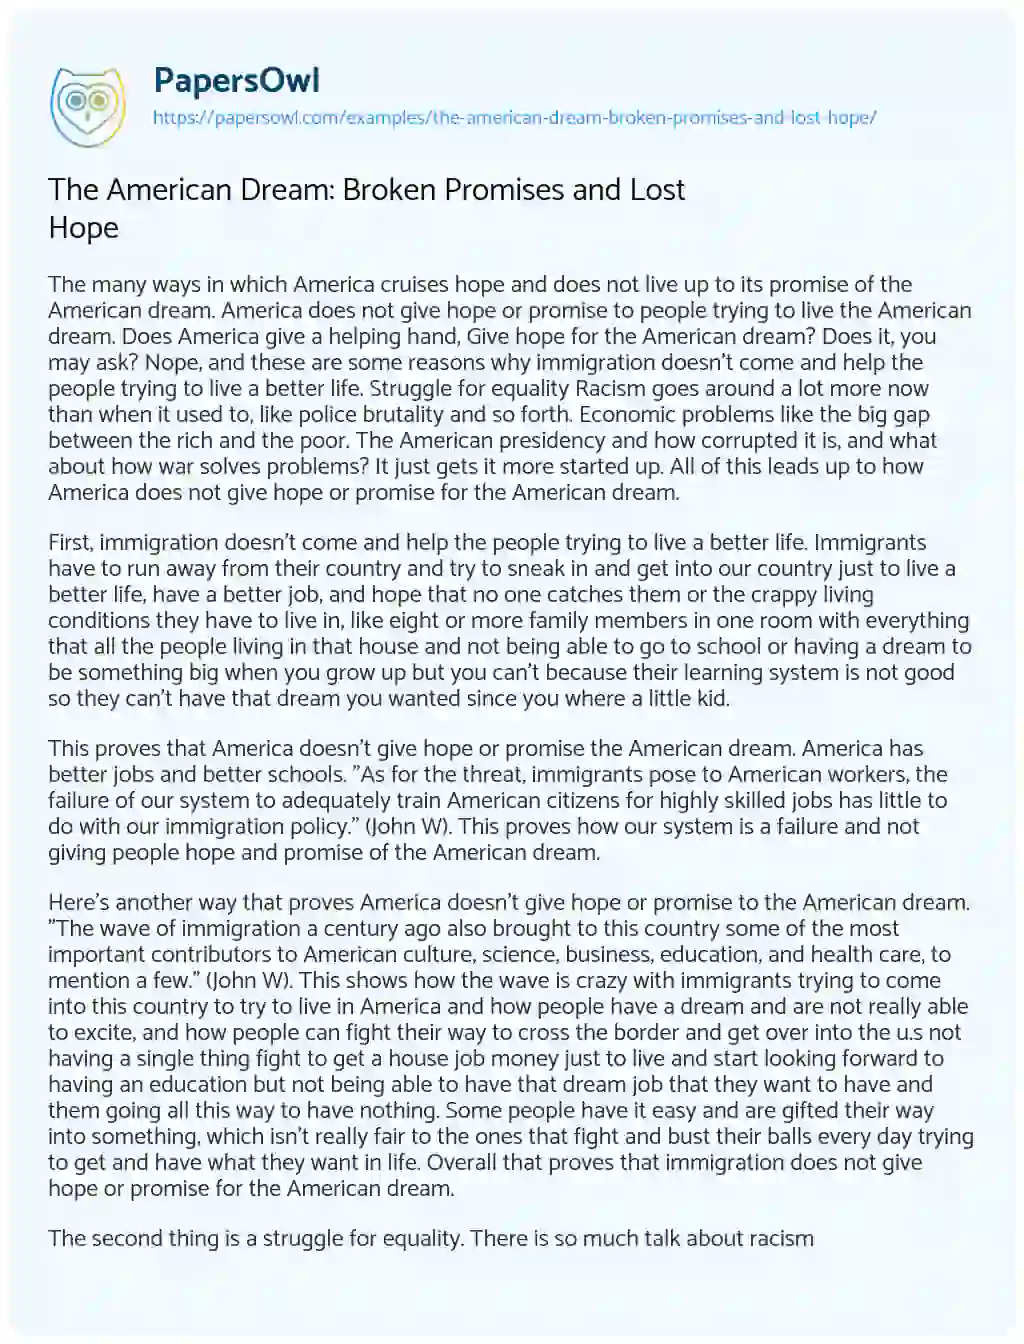 Essay on The American Dream: Broken Promises and Lost Hope